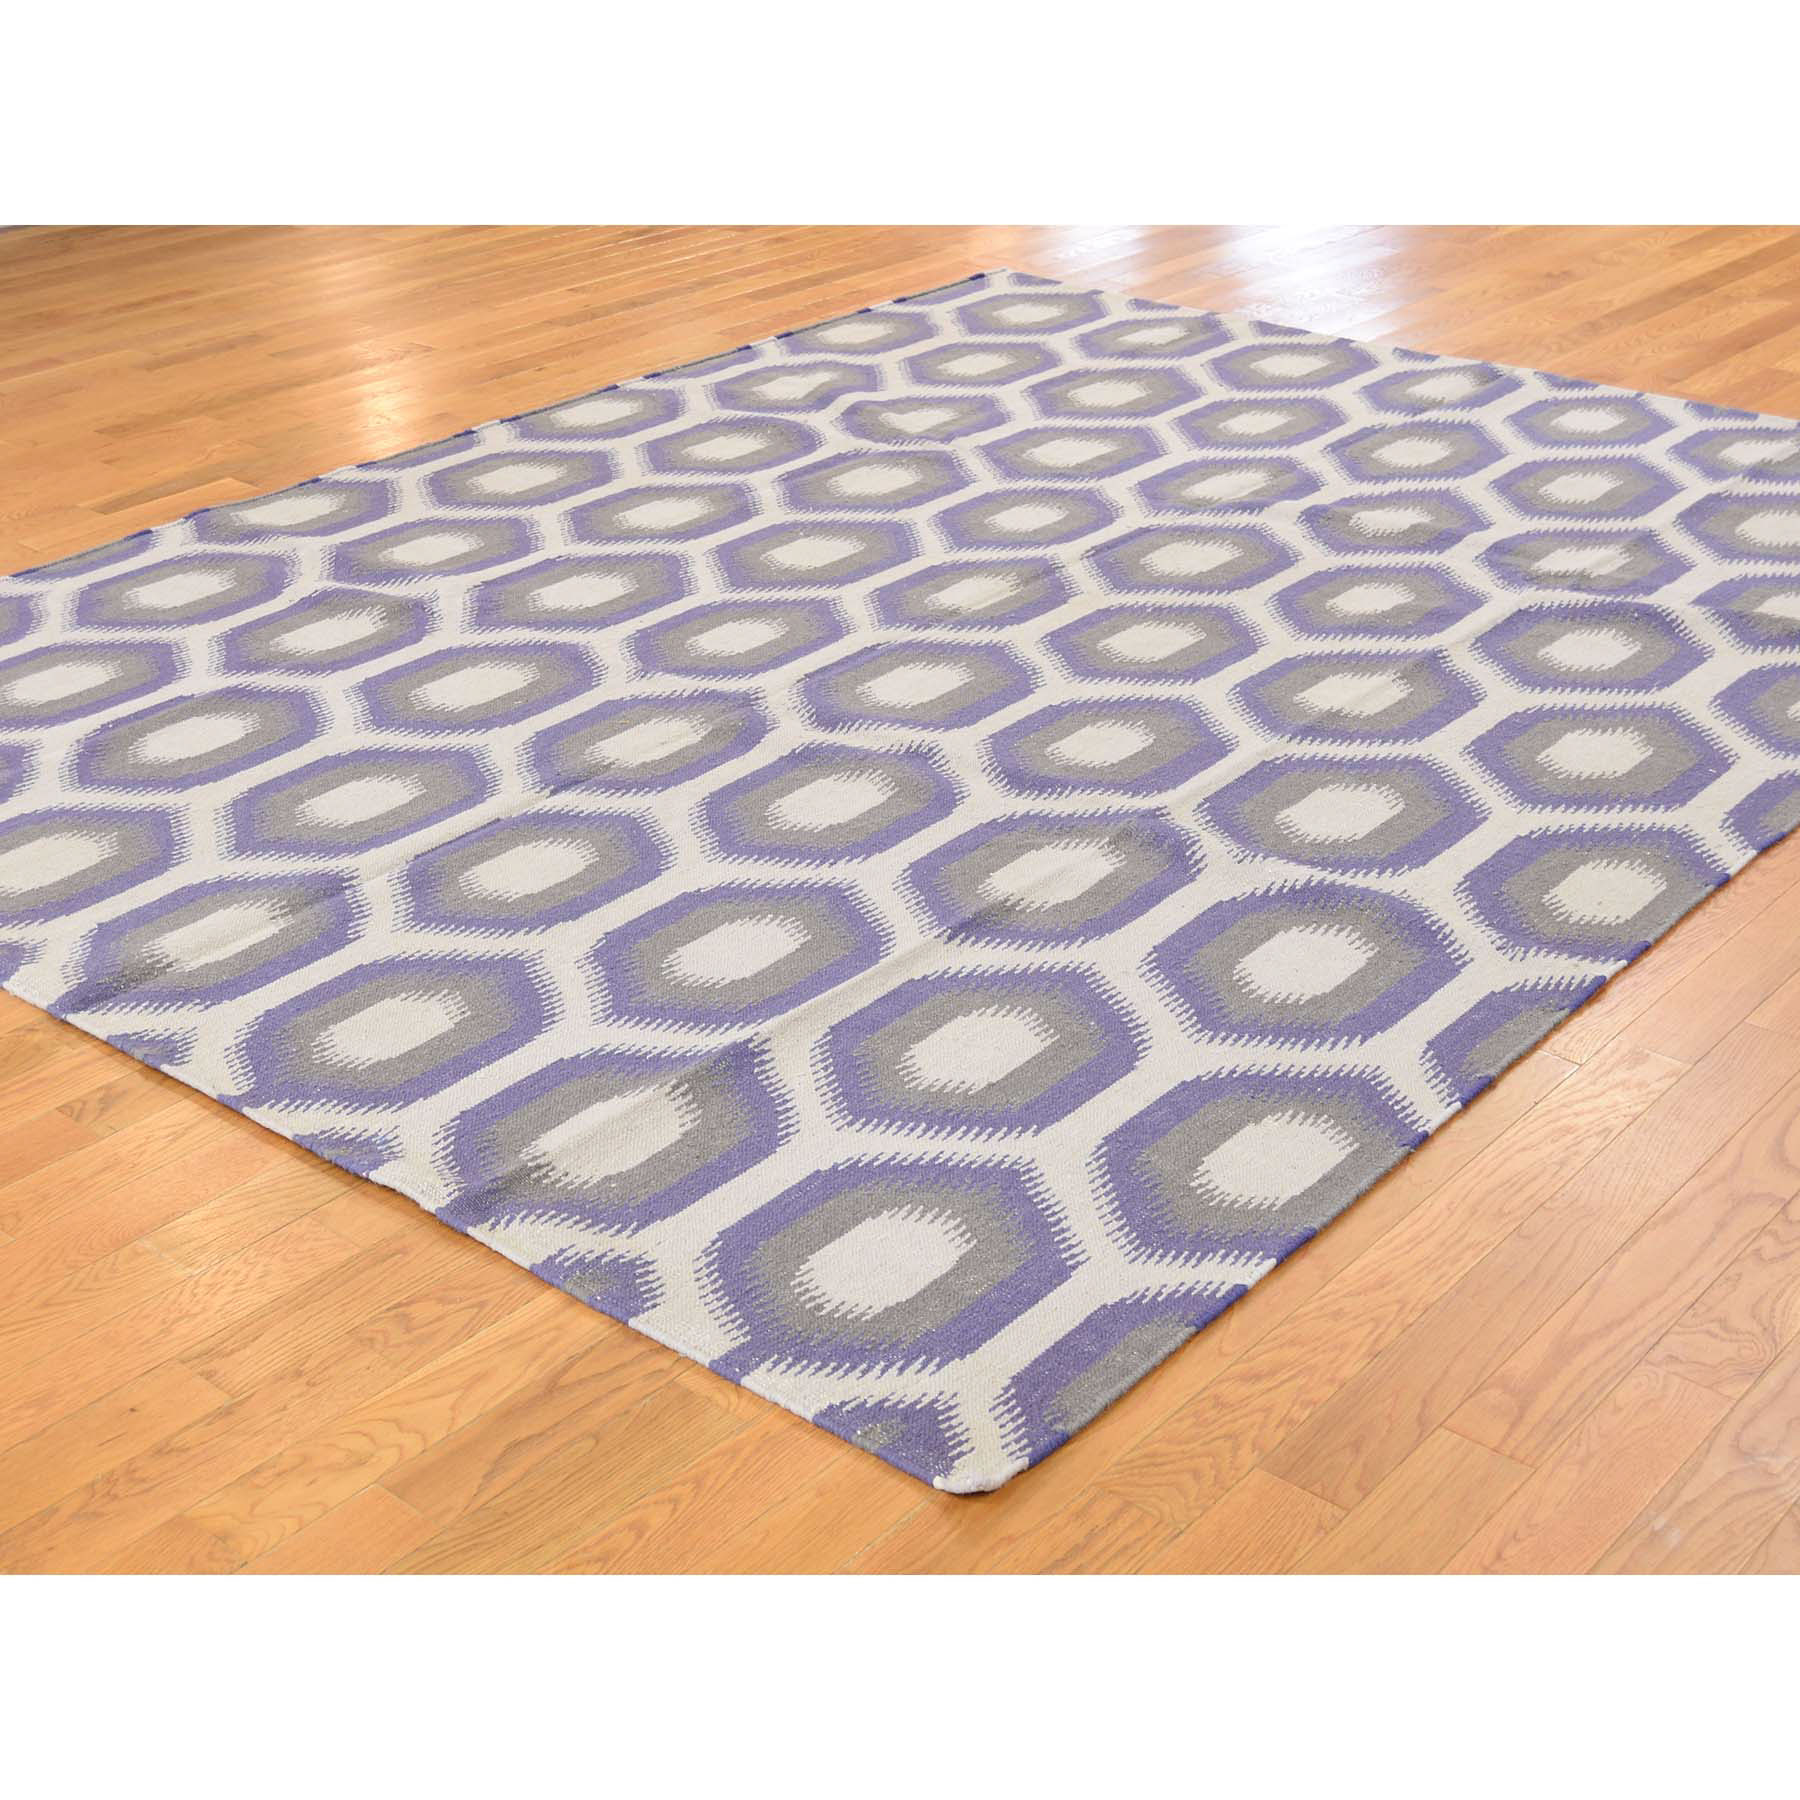 8-10--x12-2-- Purple Flat Weave Durie Kilim Reversible Hand Woven Rug 